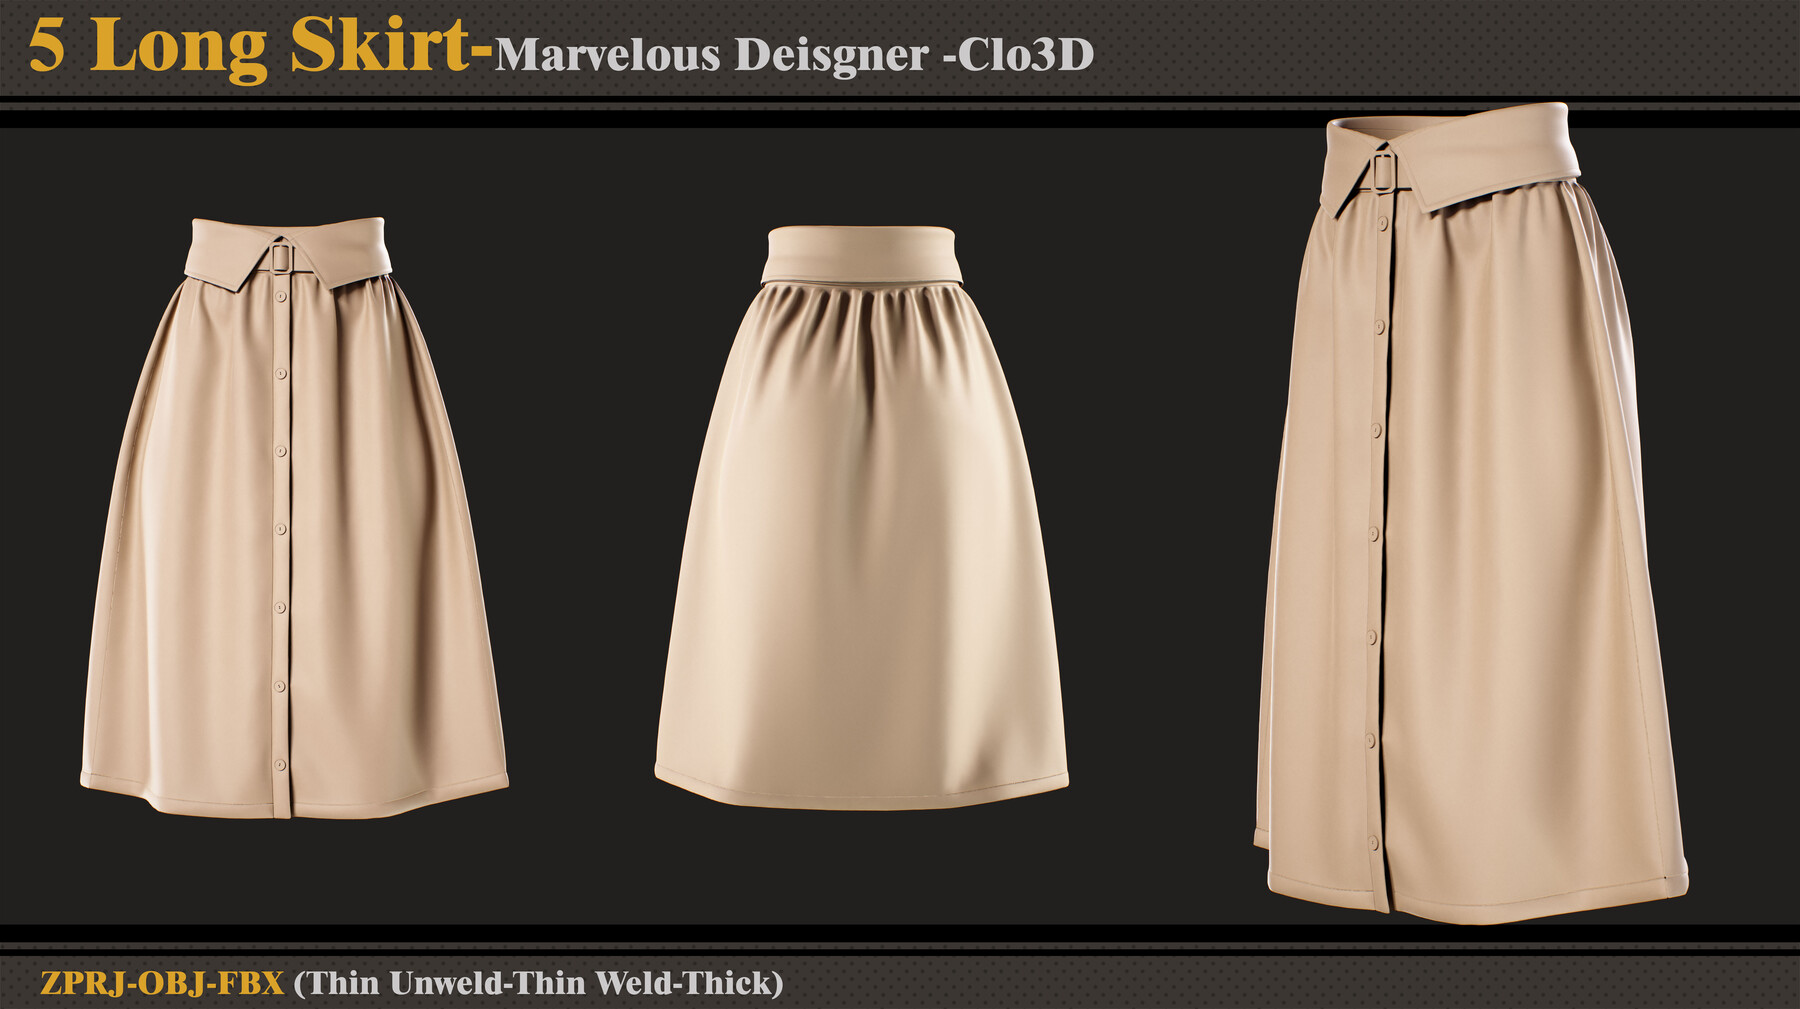 How to make Elastic Waistband in Clo3D and Marvelous Designer